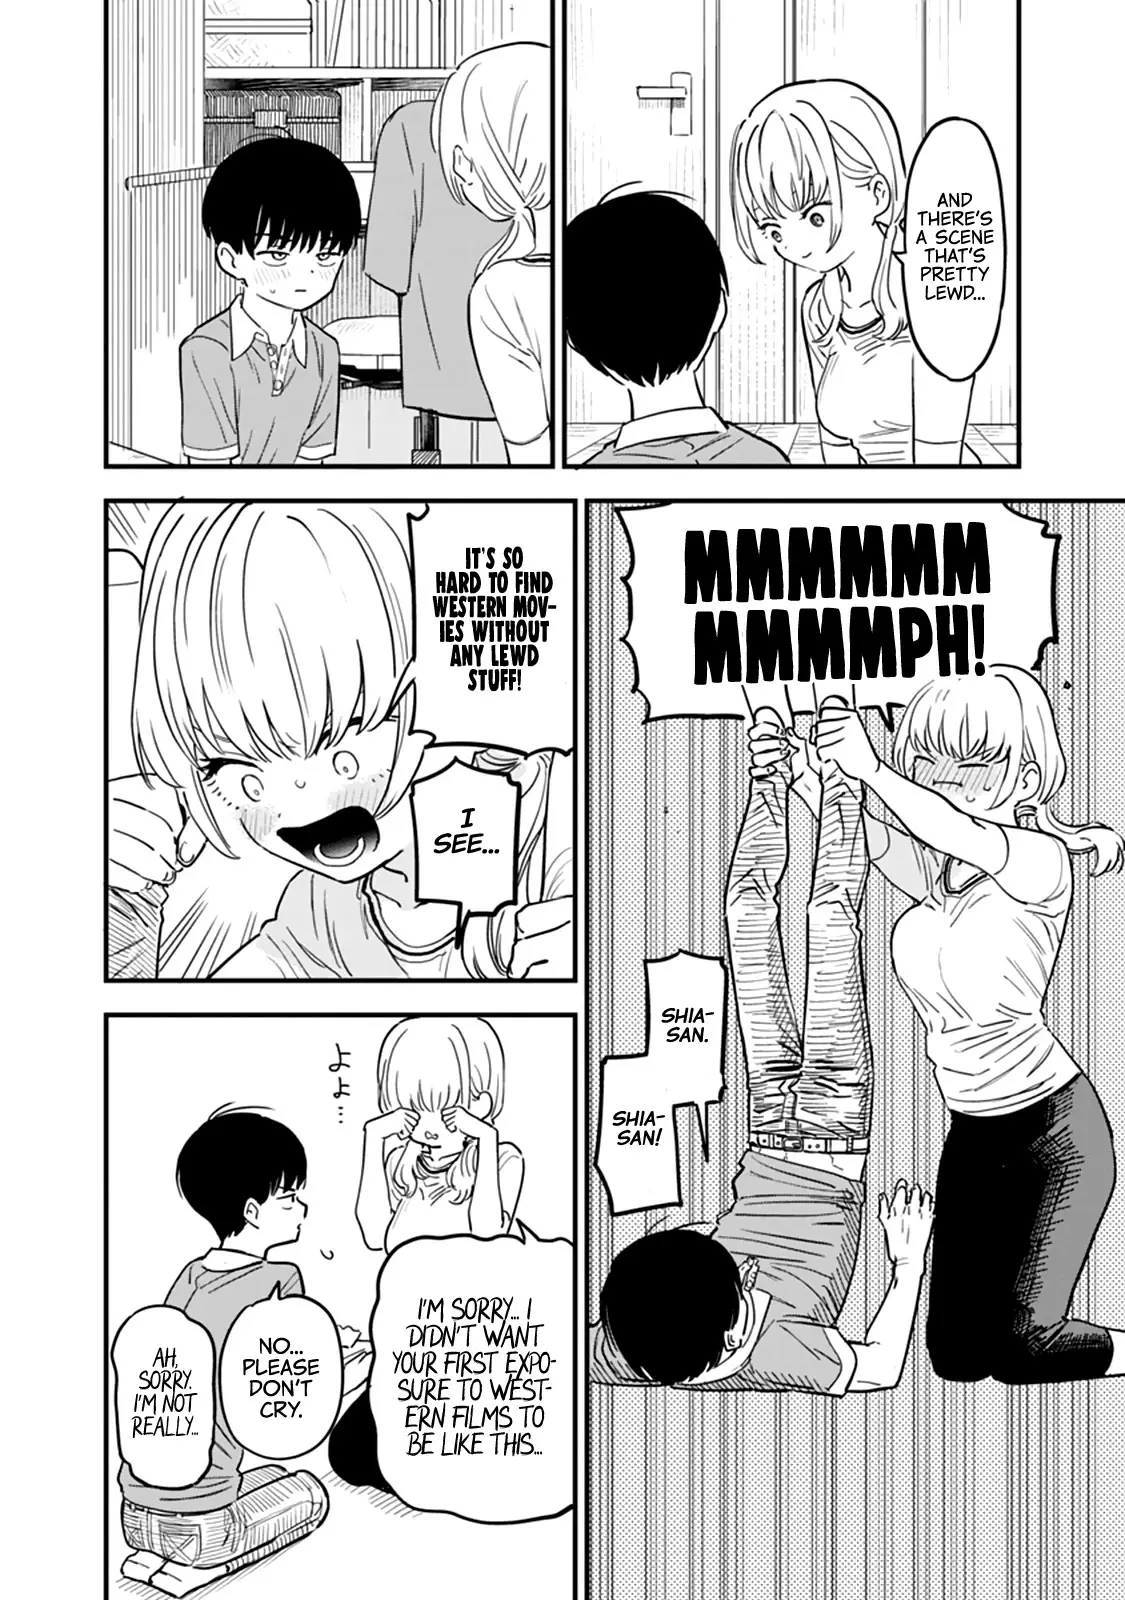 I'm In Love With The Older Girl Next Door - 1 page 8